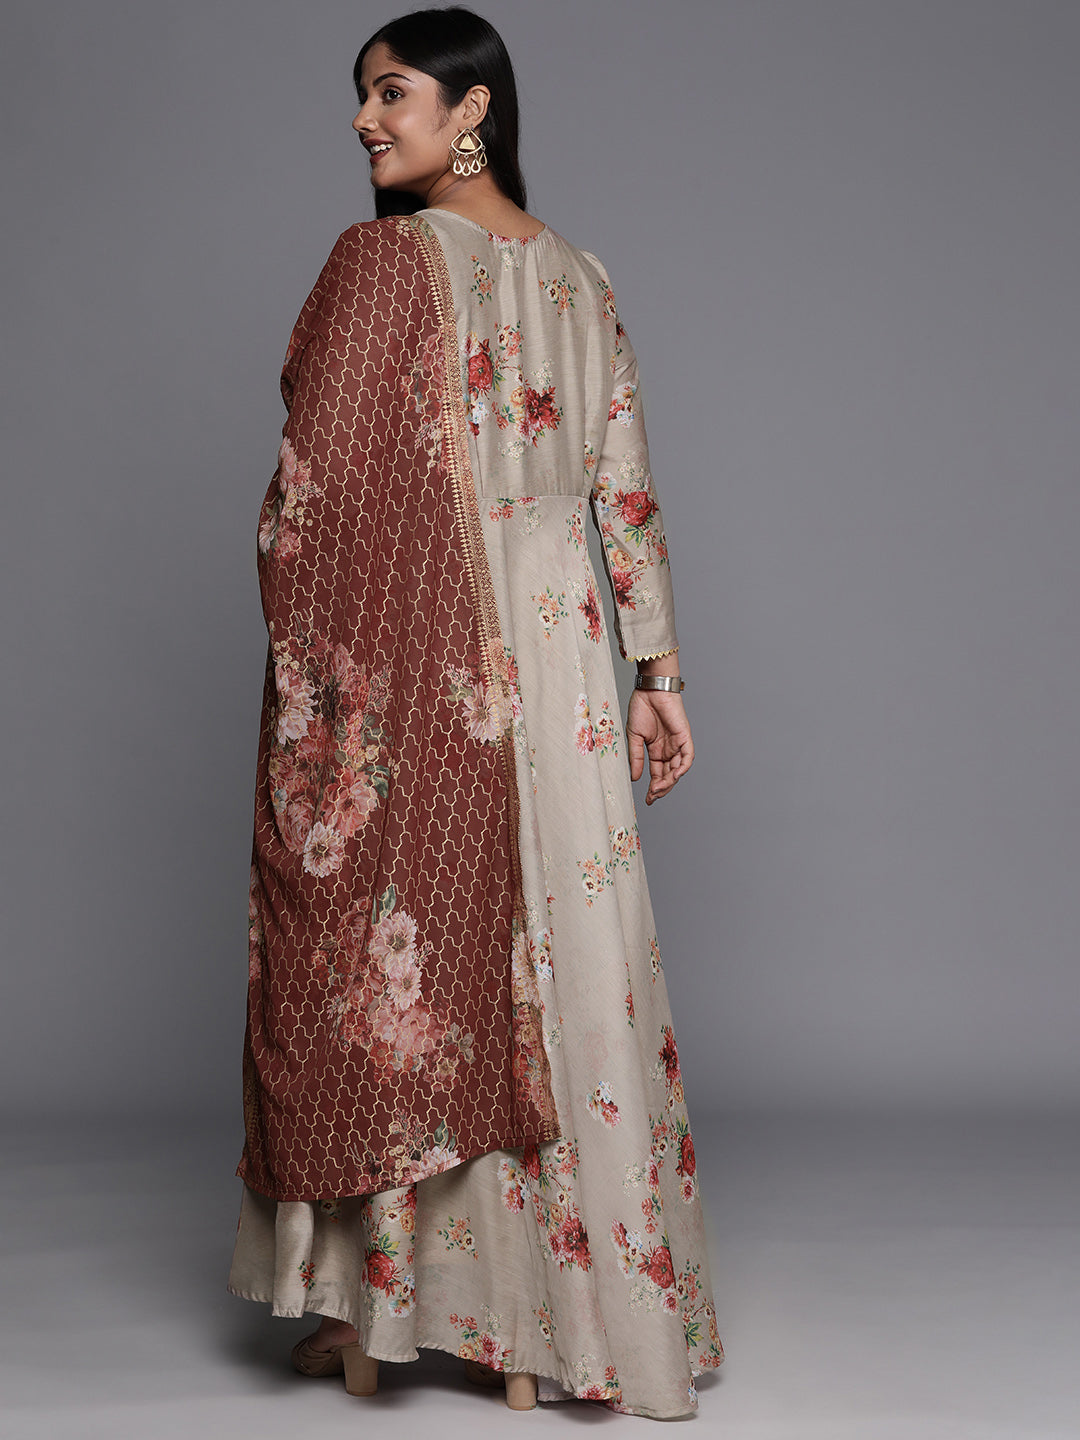 Women's Traditional Wear Ethnic Dress - A Plus By Ahalyaa